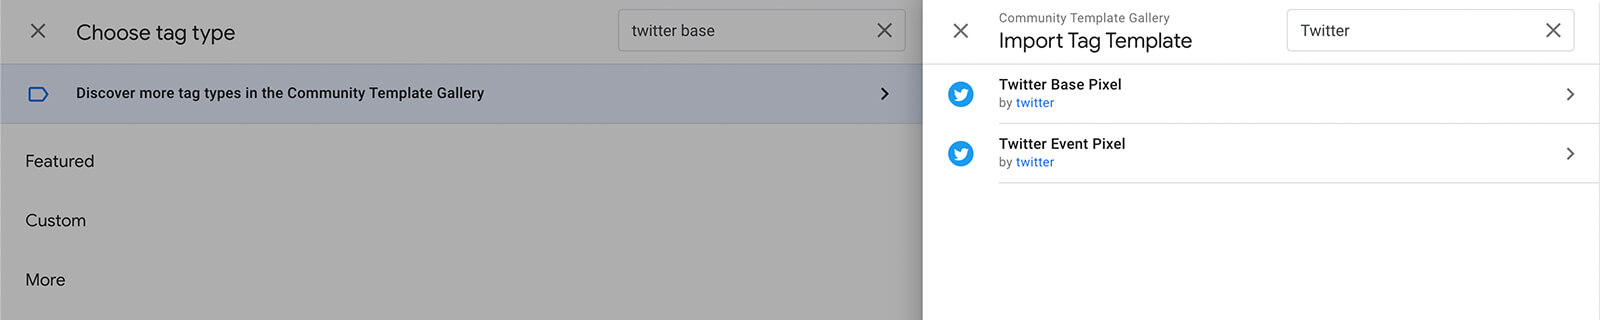 how-to-install-the-twitter-pixel-wtih-a-tag-manager-gtm-track-twitter-ad-conversions-configure-events-example-12